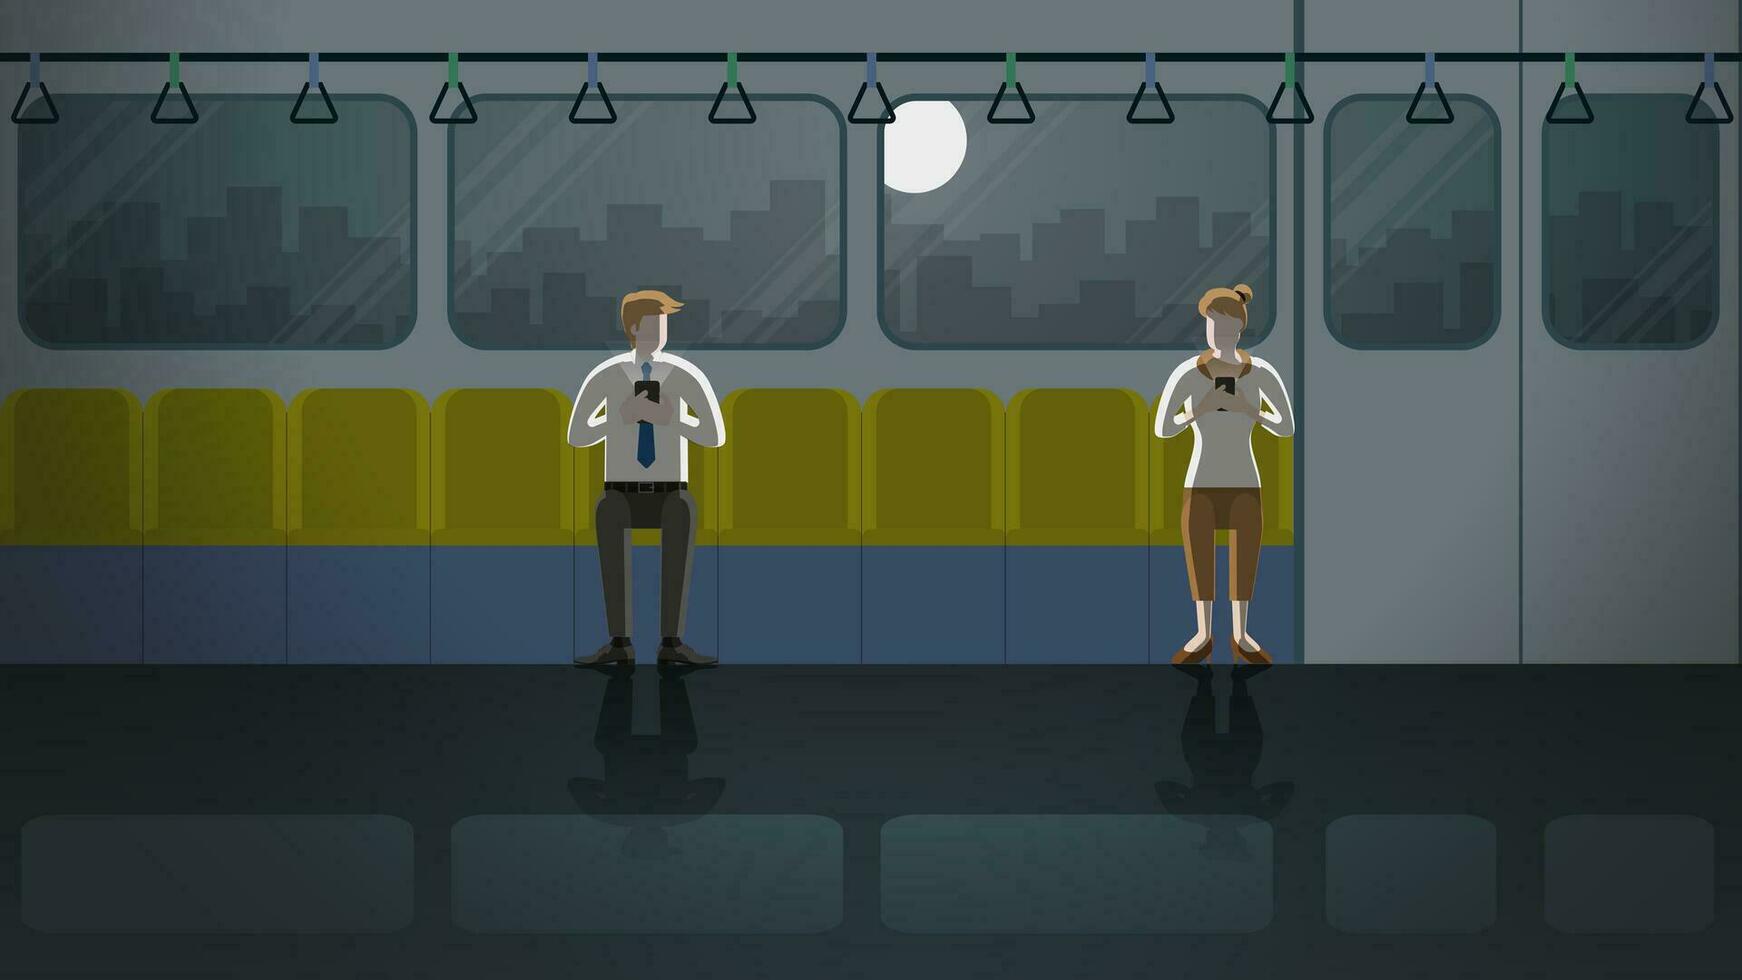 Love at first sight between man and woman in train public transportation vector